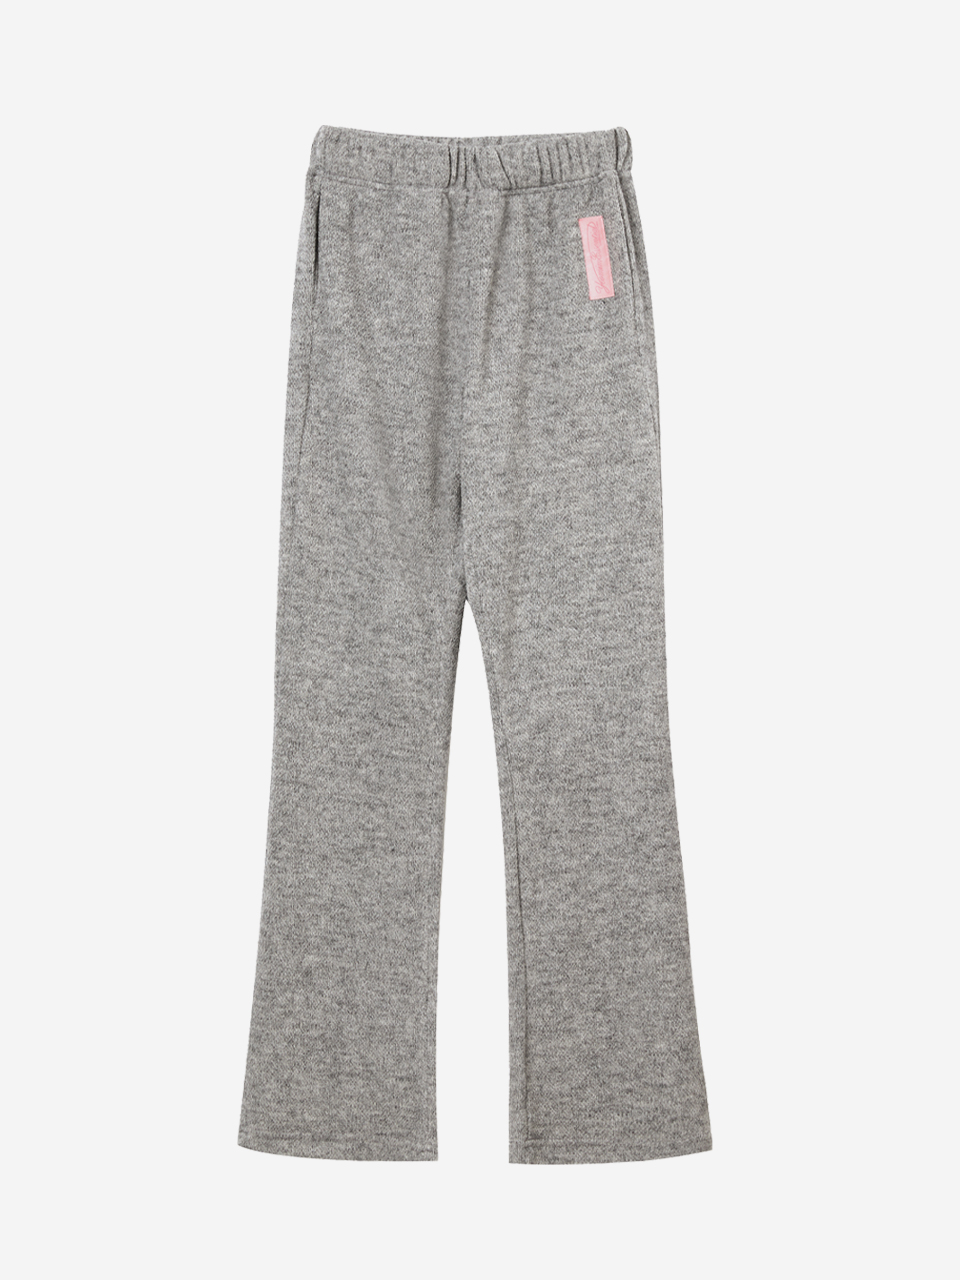 essential knitted boot cut pants (grey)